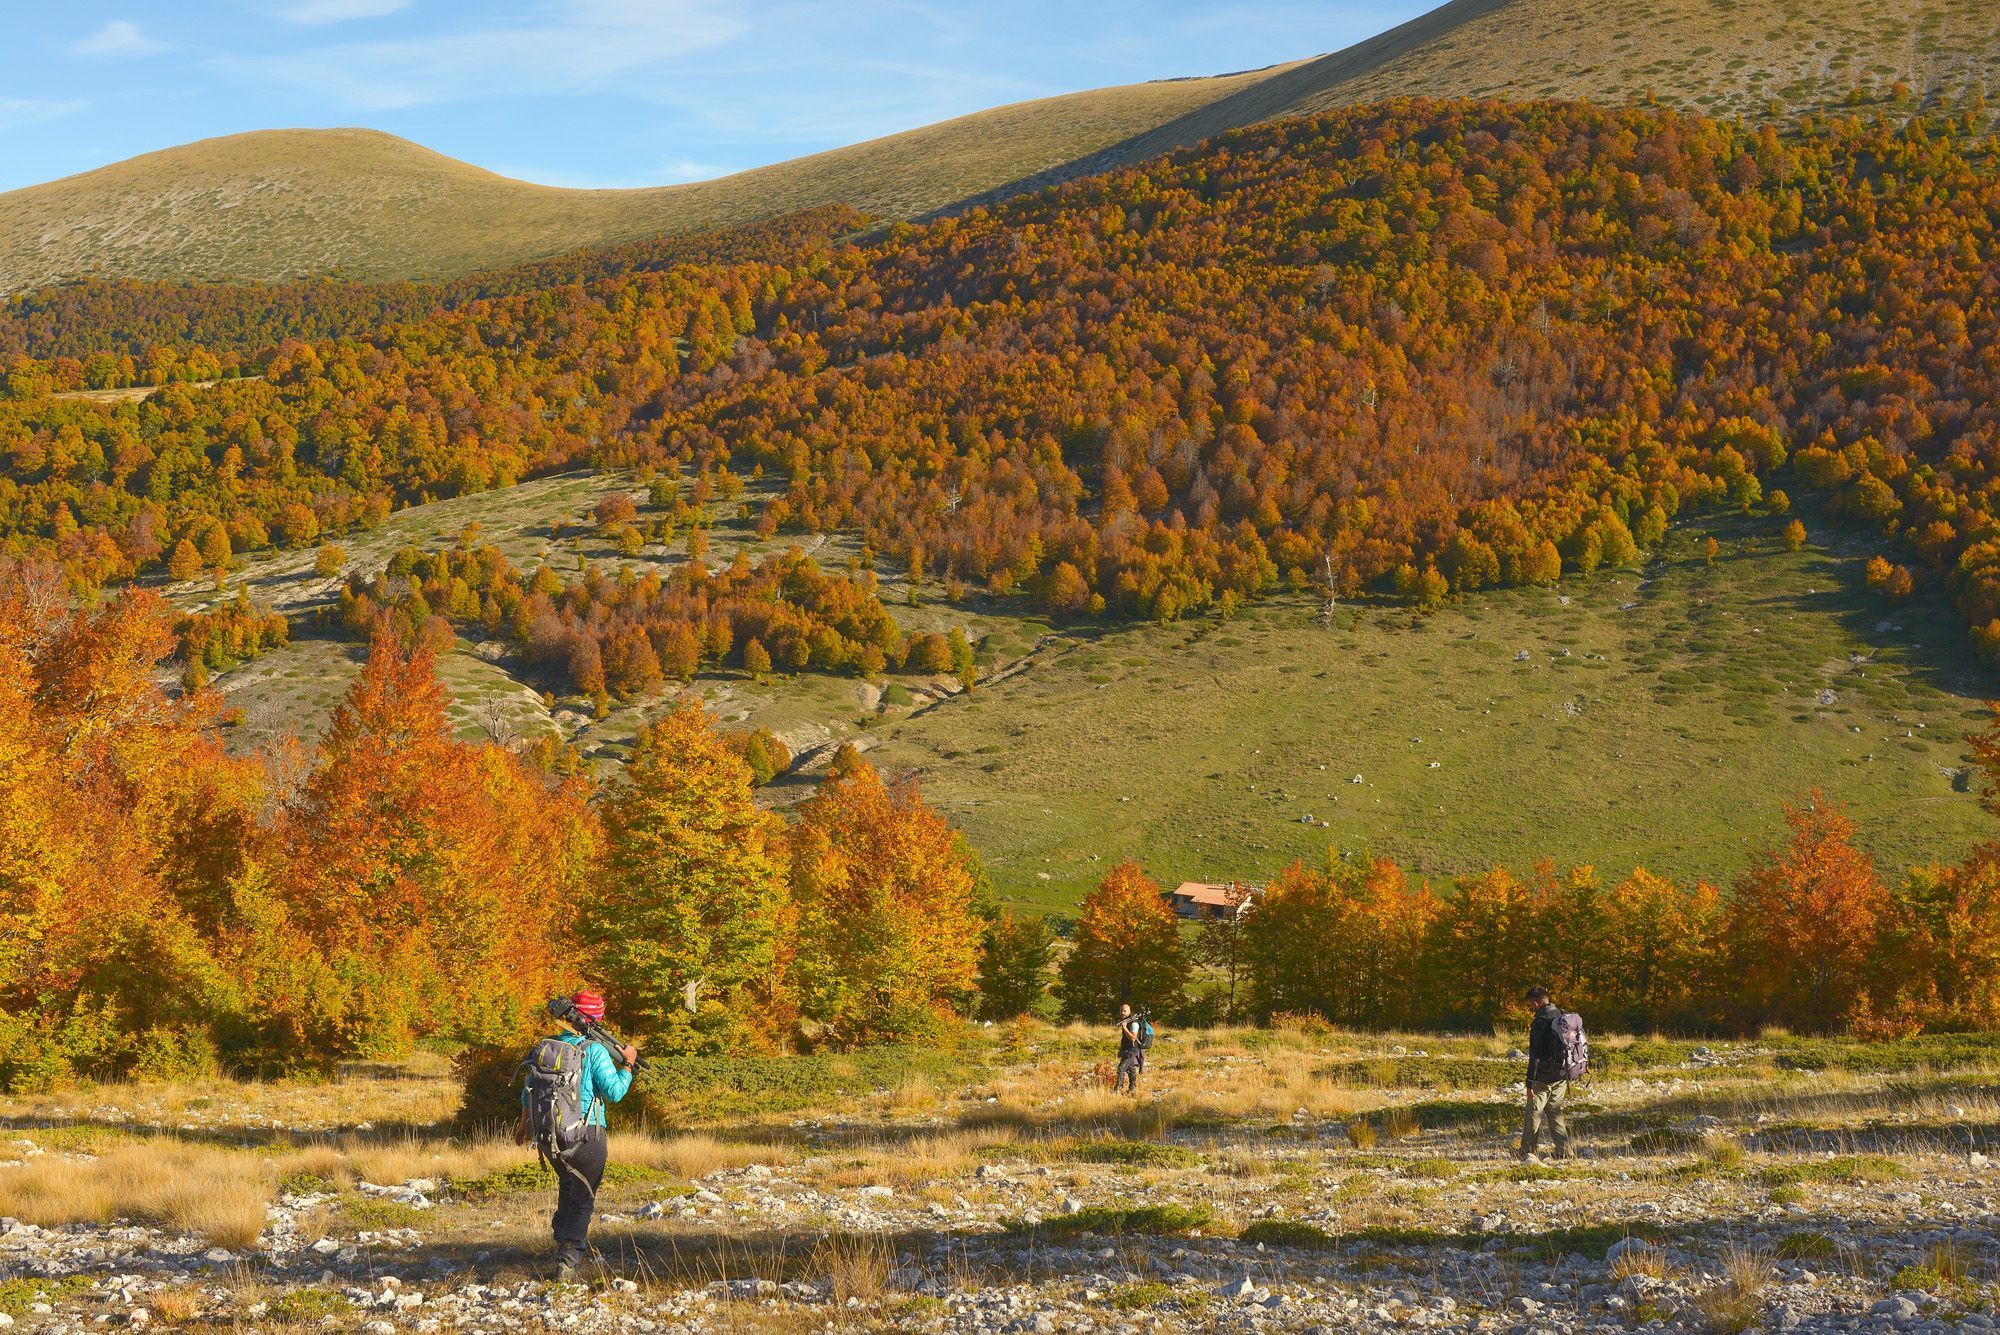 The Autumnal forests which surround Rifugio Terraegna, which sits at the bottom of the valley. Photo: Wildlife Adventures